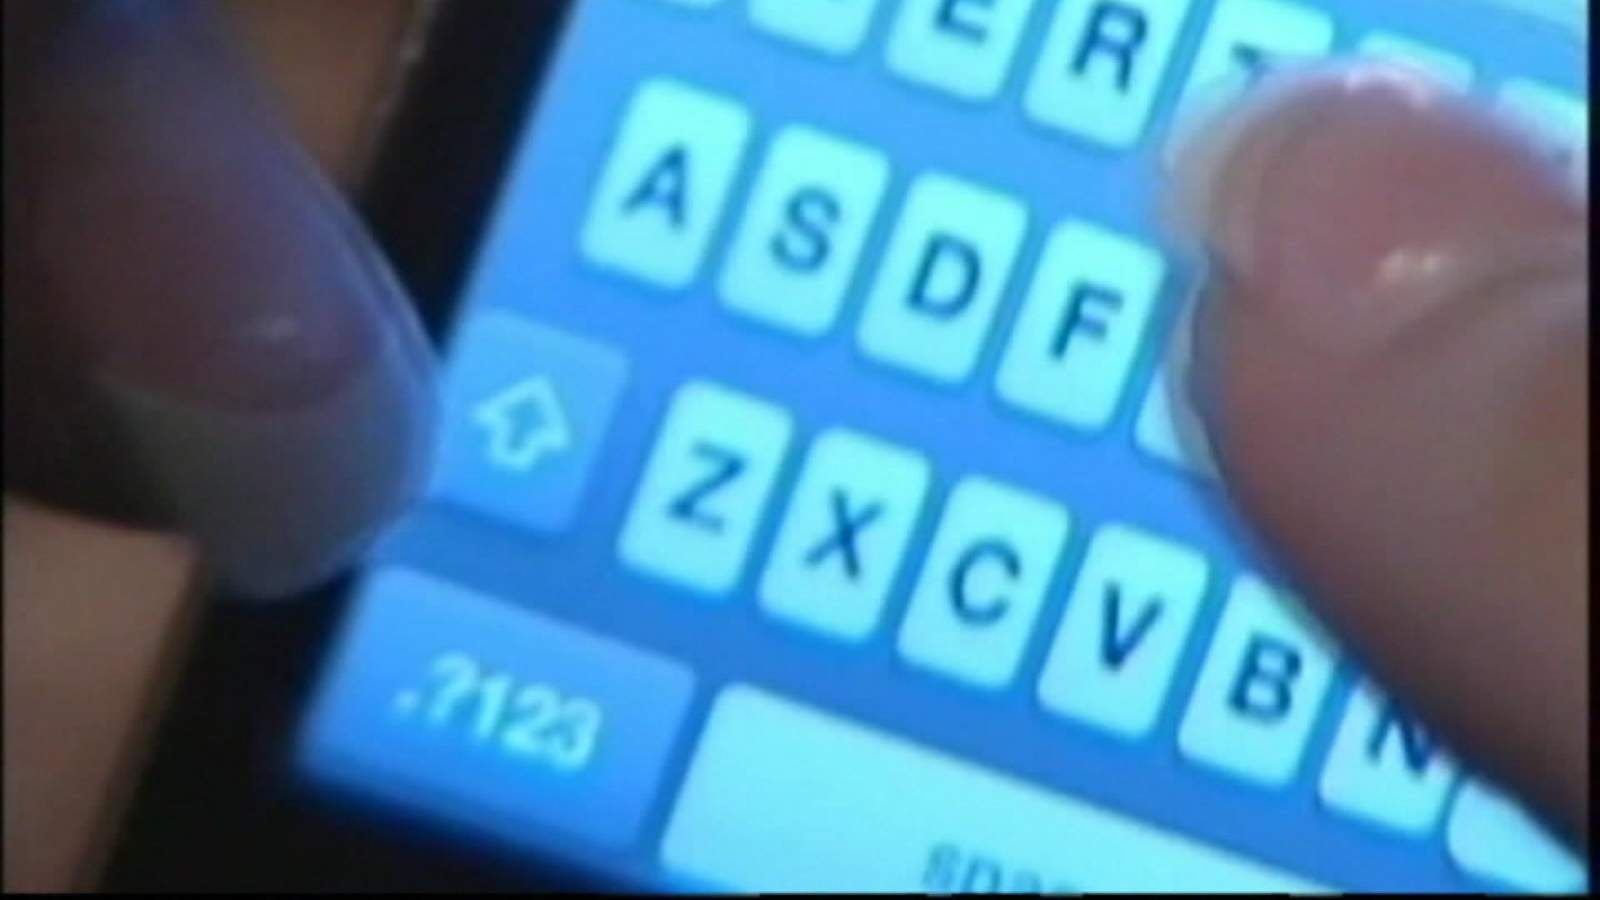 Mother upset with school’s handling of alleged inappropriate messages to 11-year-old daughter